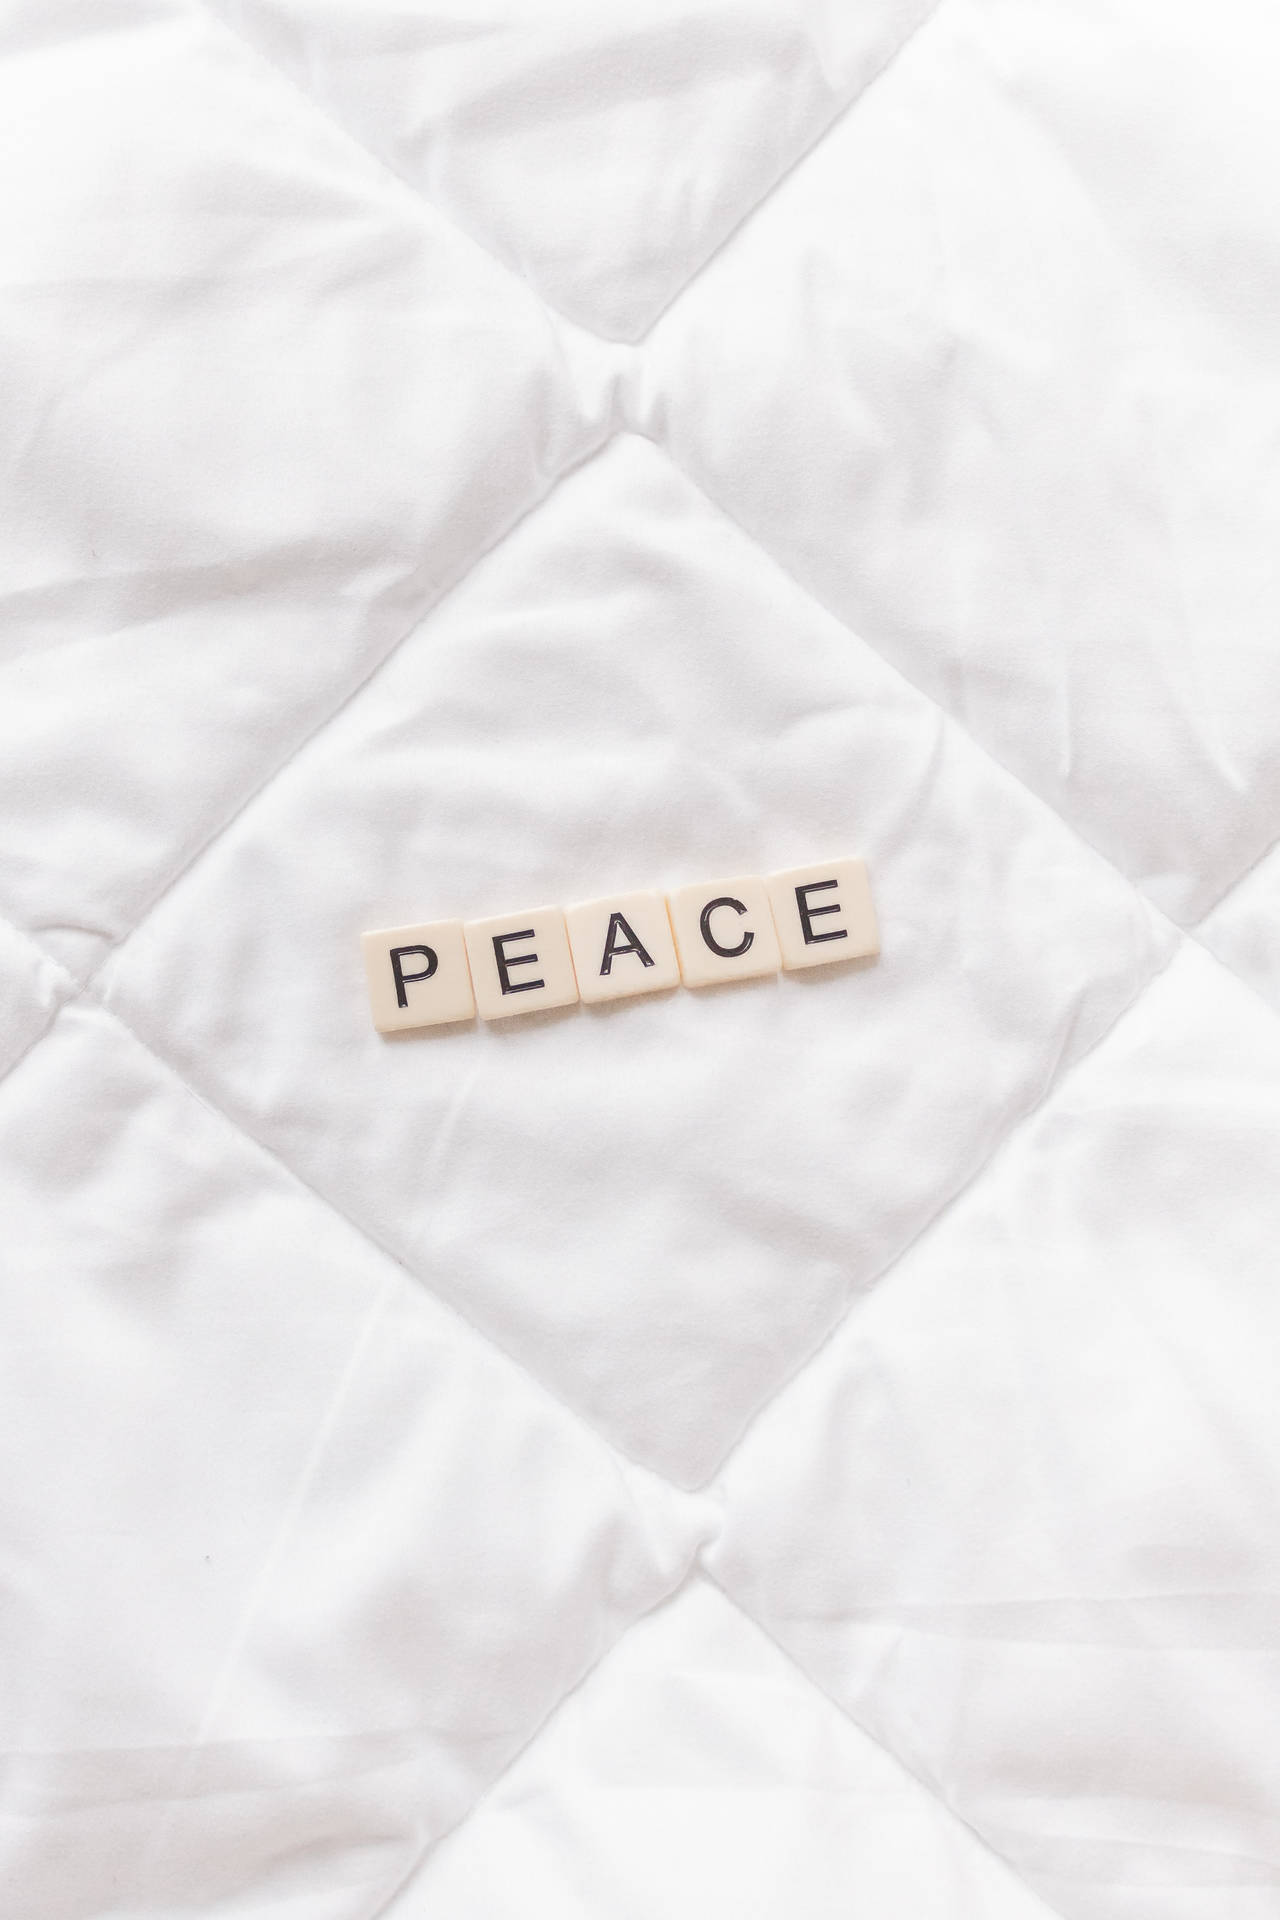 A close up of the word peace on top - Peace